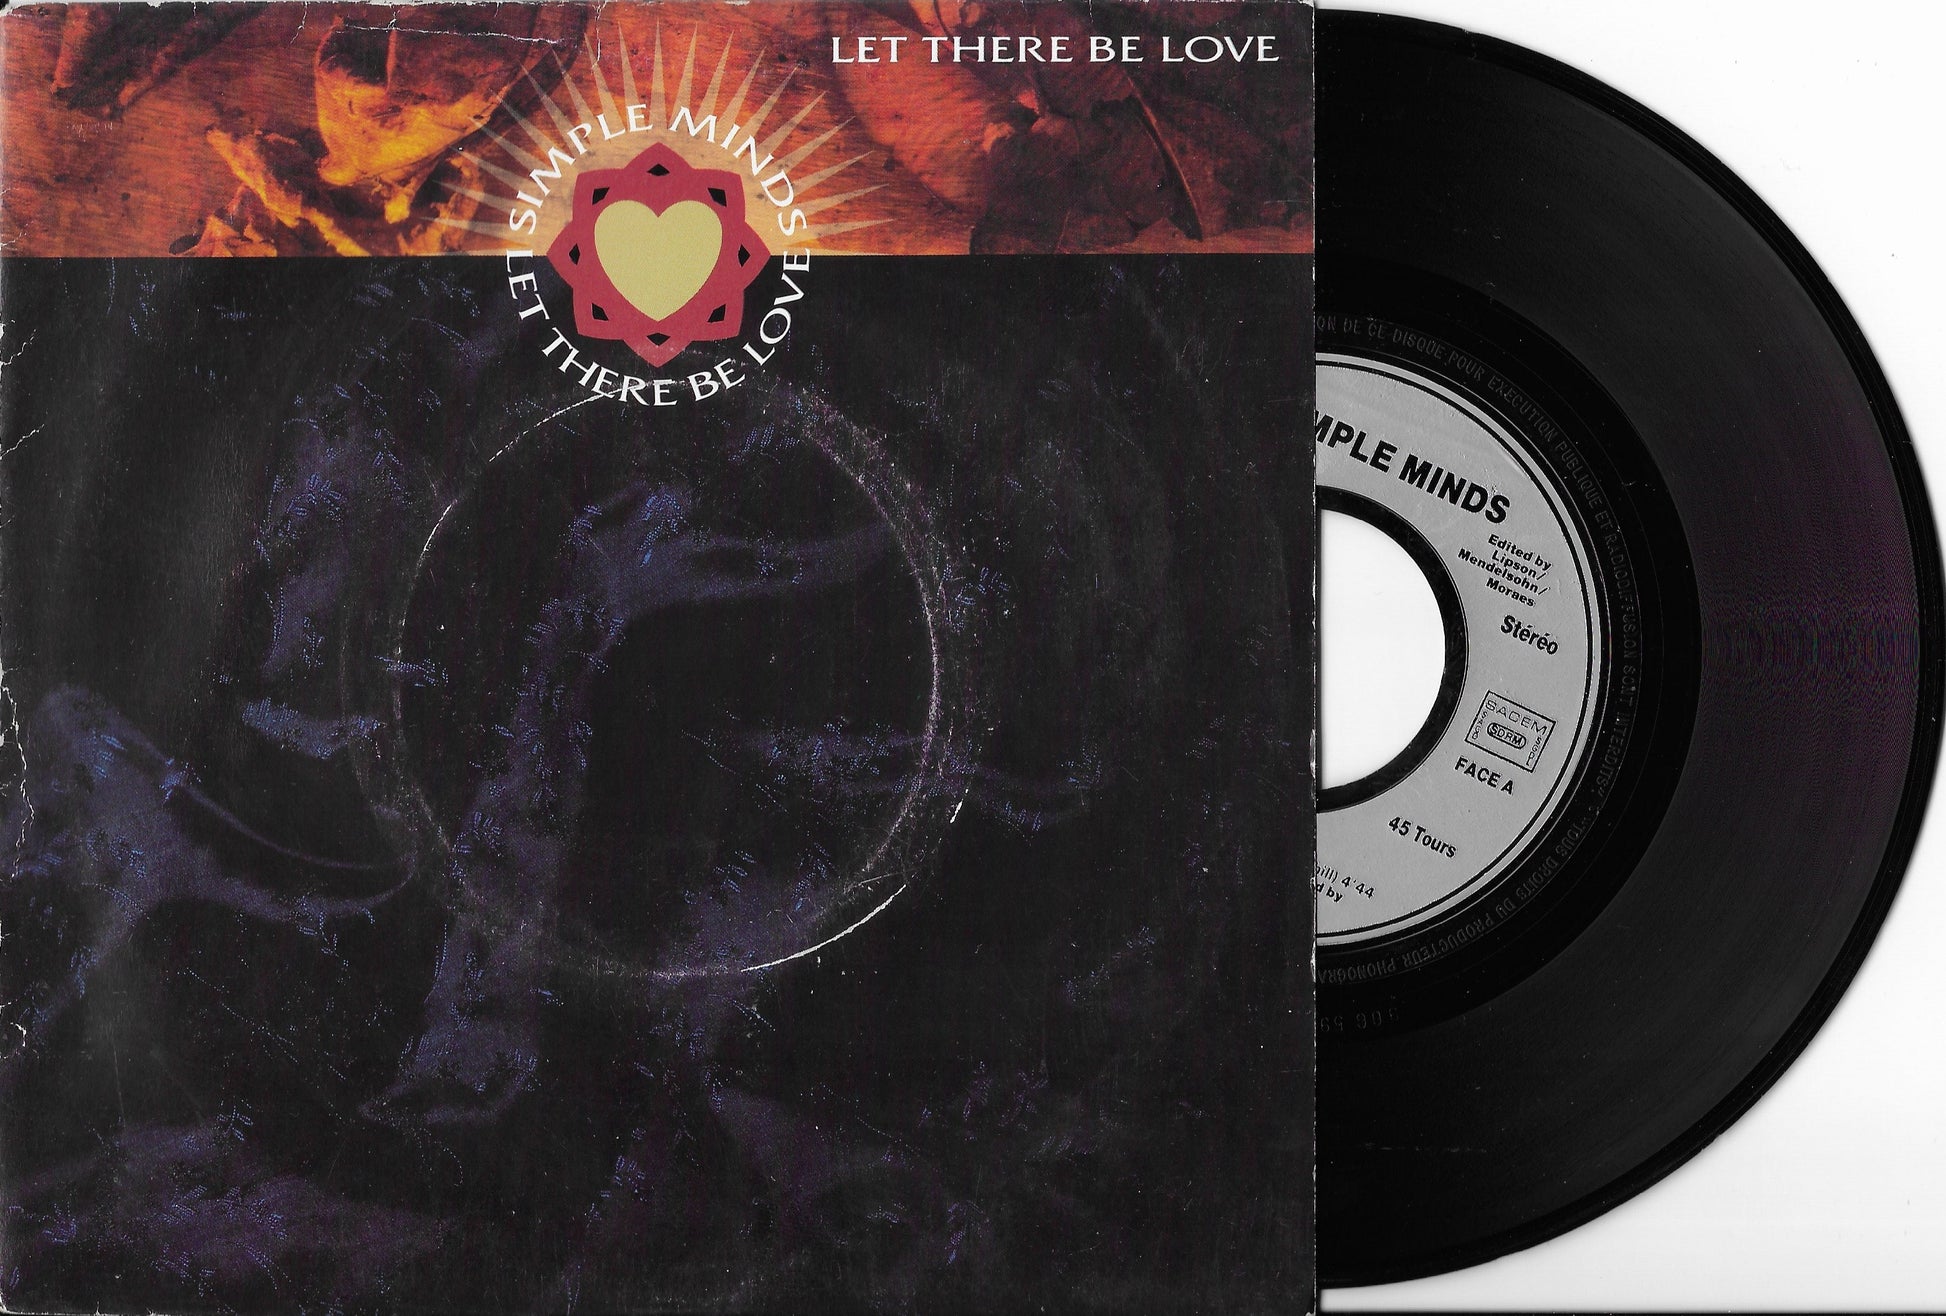 Disque Vinyle 45 tours Occasion - SIMPLE MINDS - Let There Be Love – digg'O' vinyl